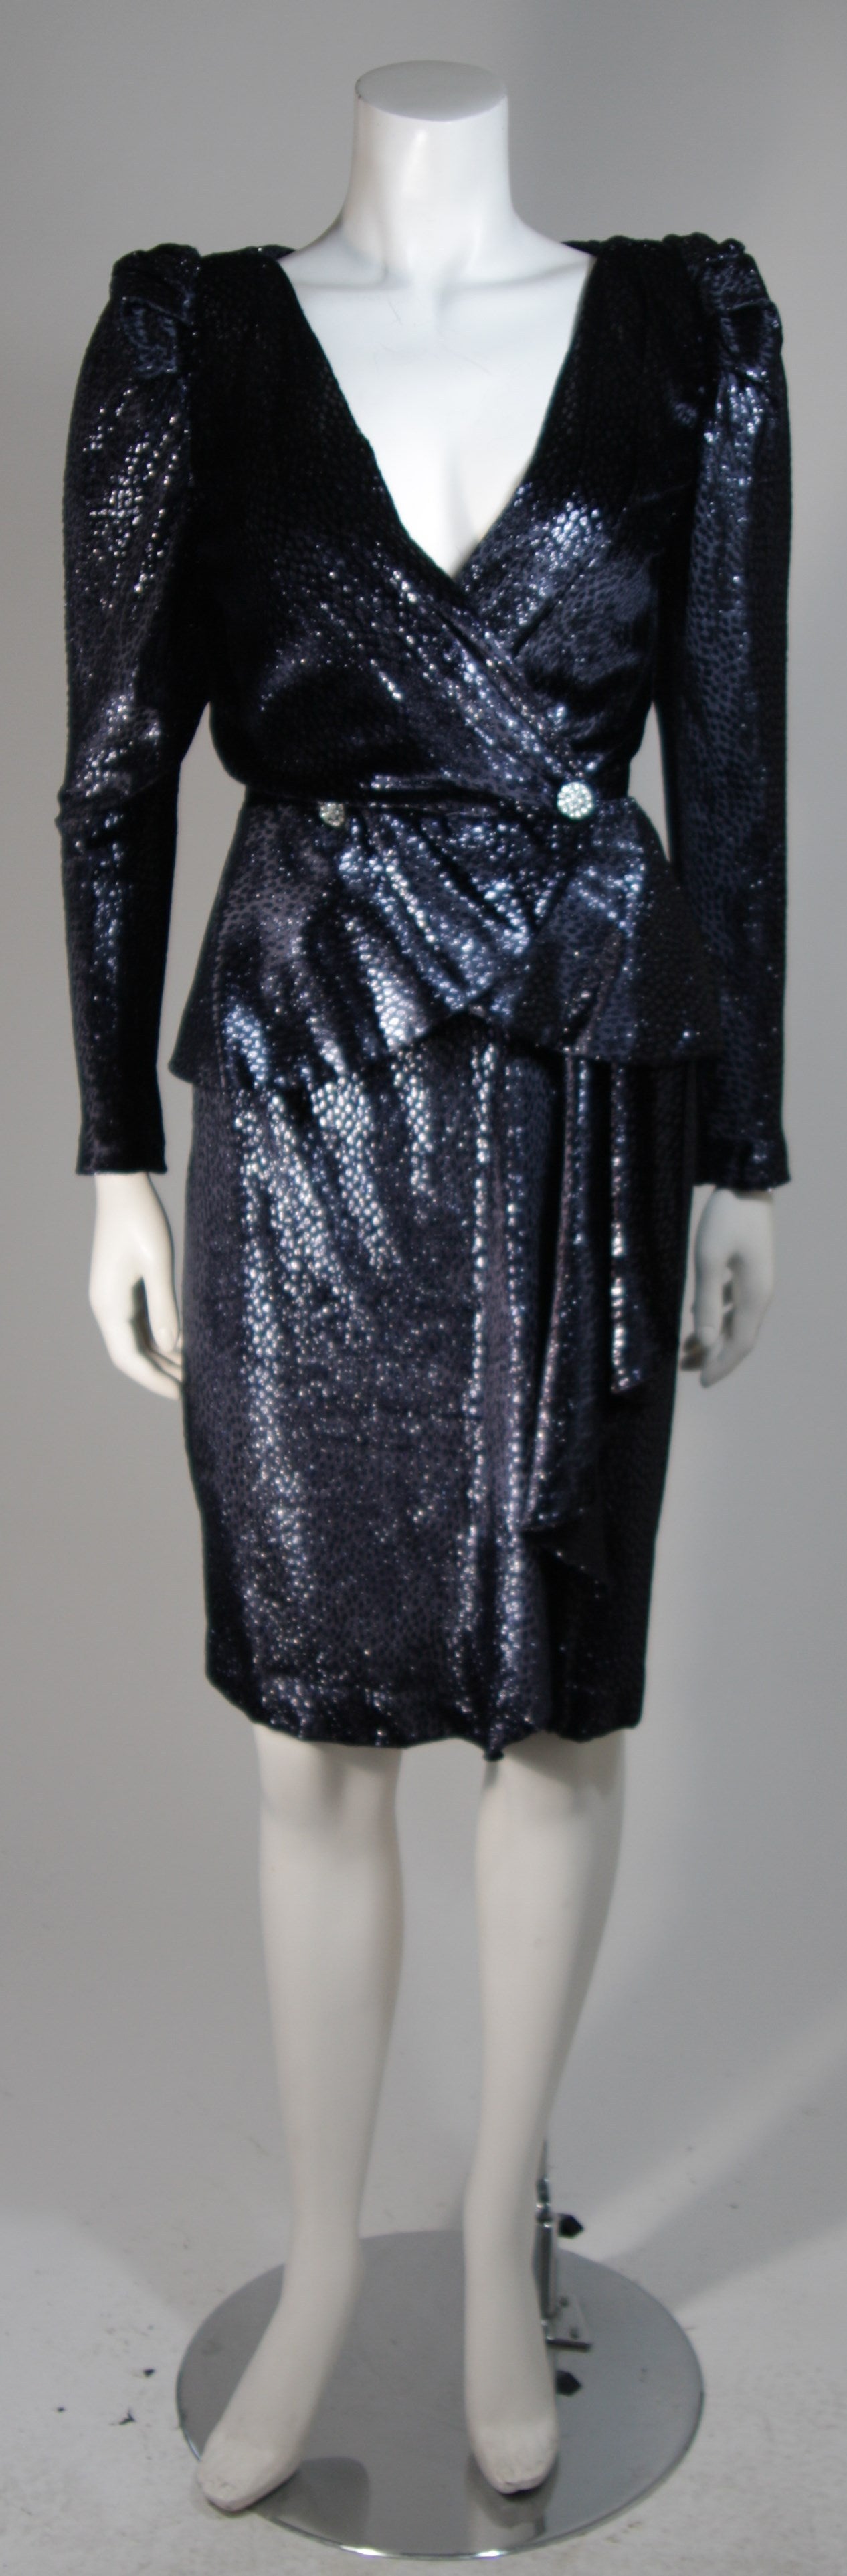 This Vicky Tiel suit is composed of a textured navy silk twill and features metallic/reflective properties. The jacket features a center front button fastening, padding at the shoulders, and a peplum waist. The skirt has a figure hugging silhouette